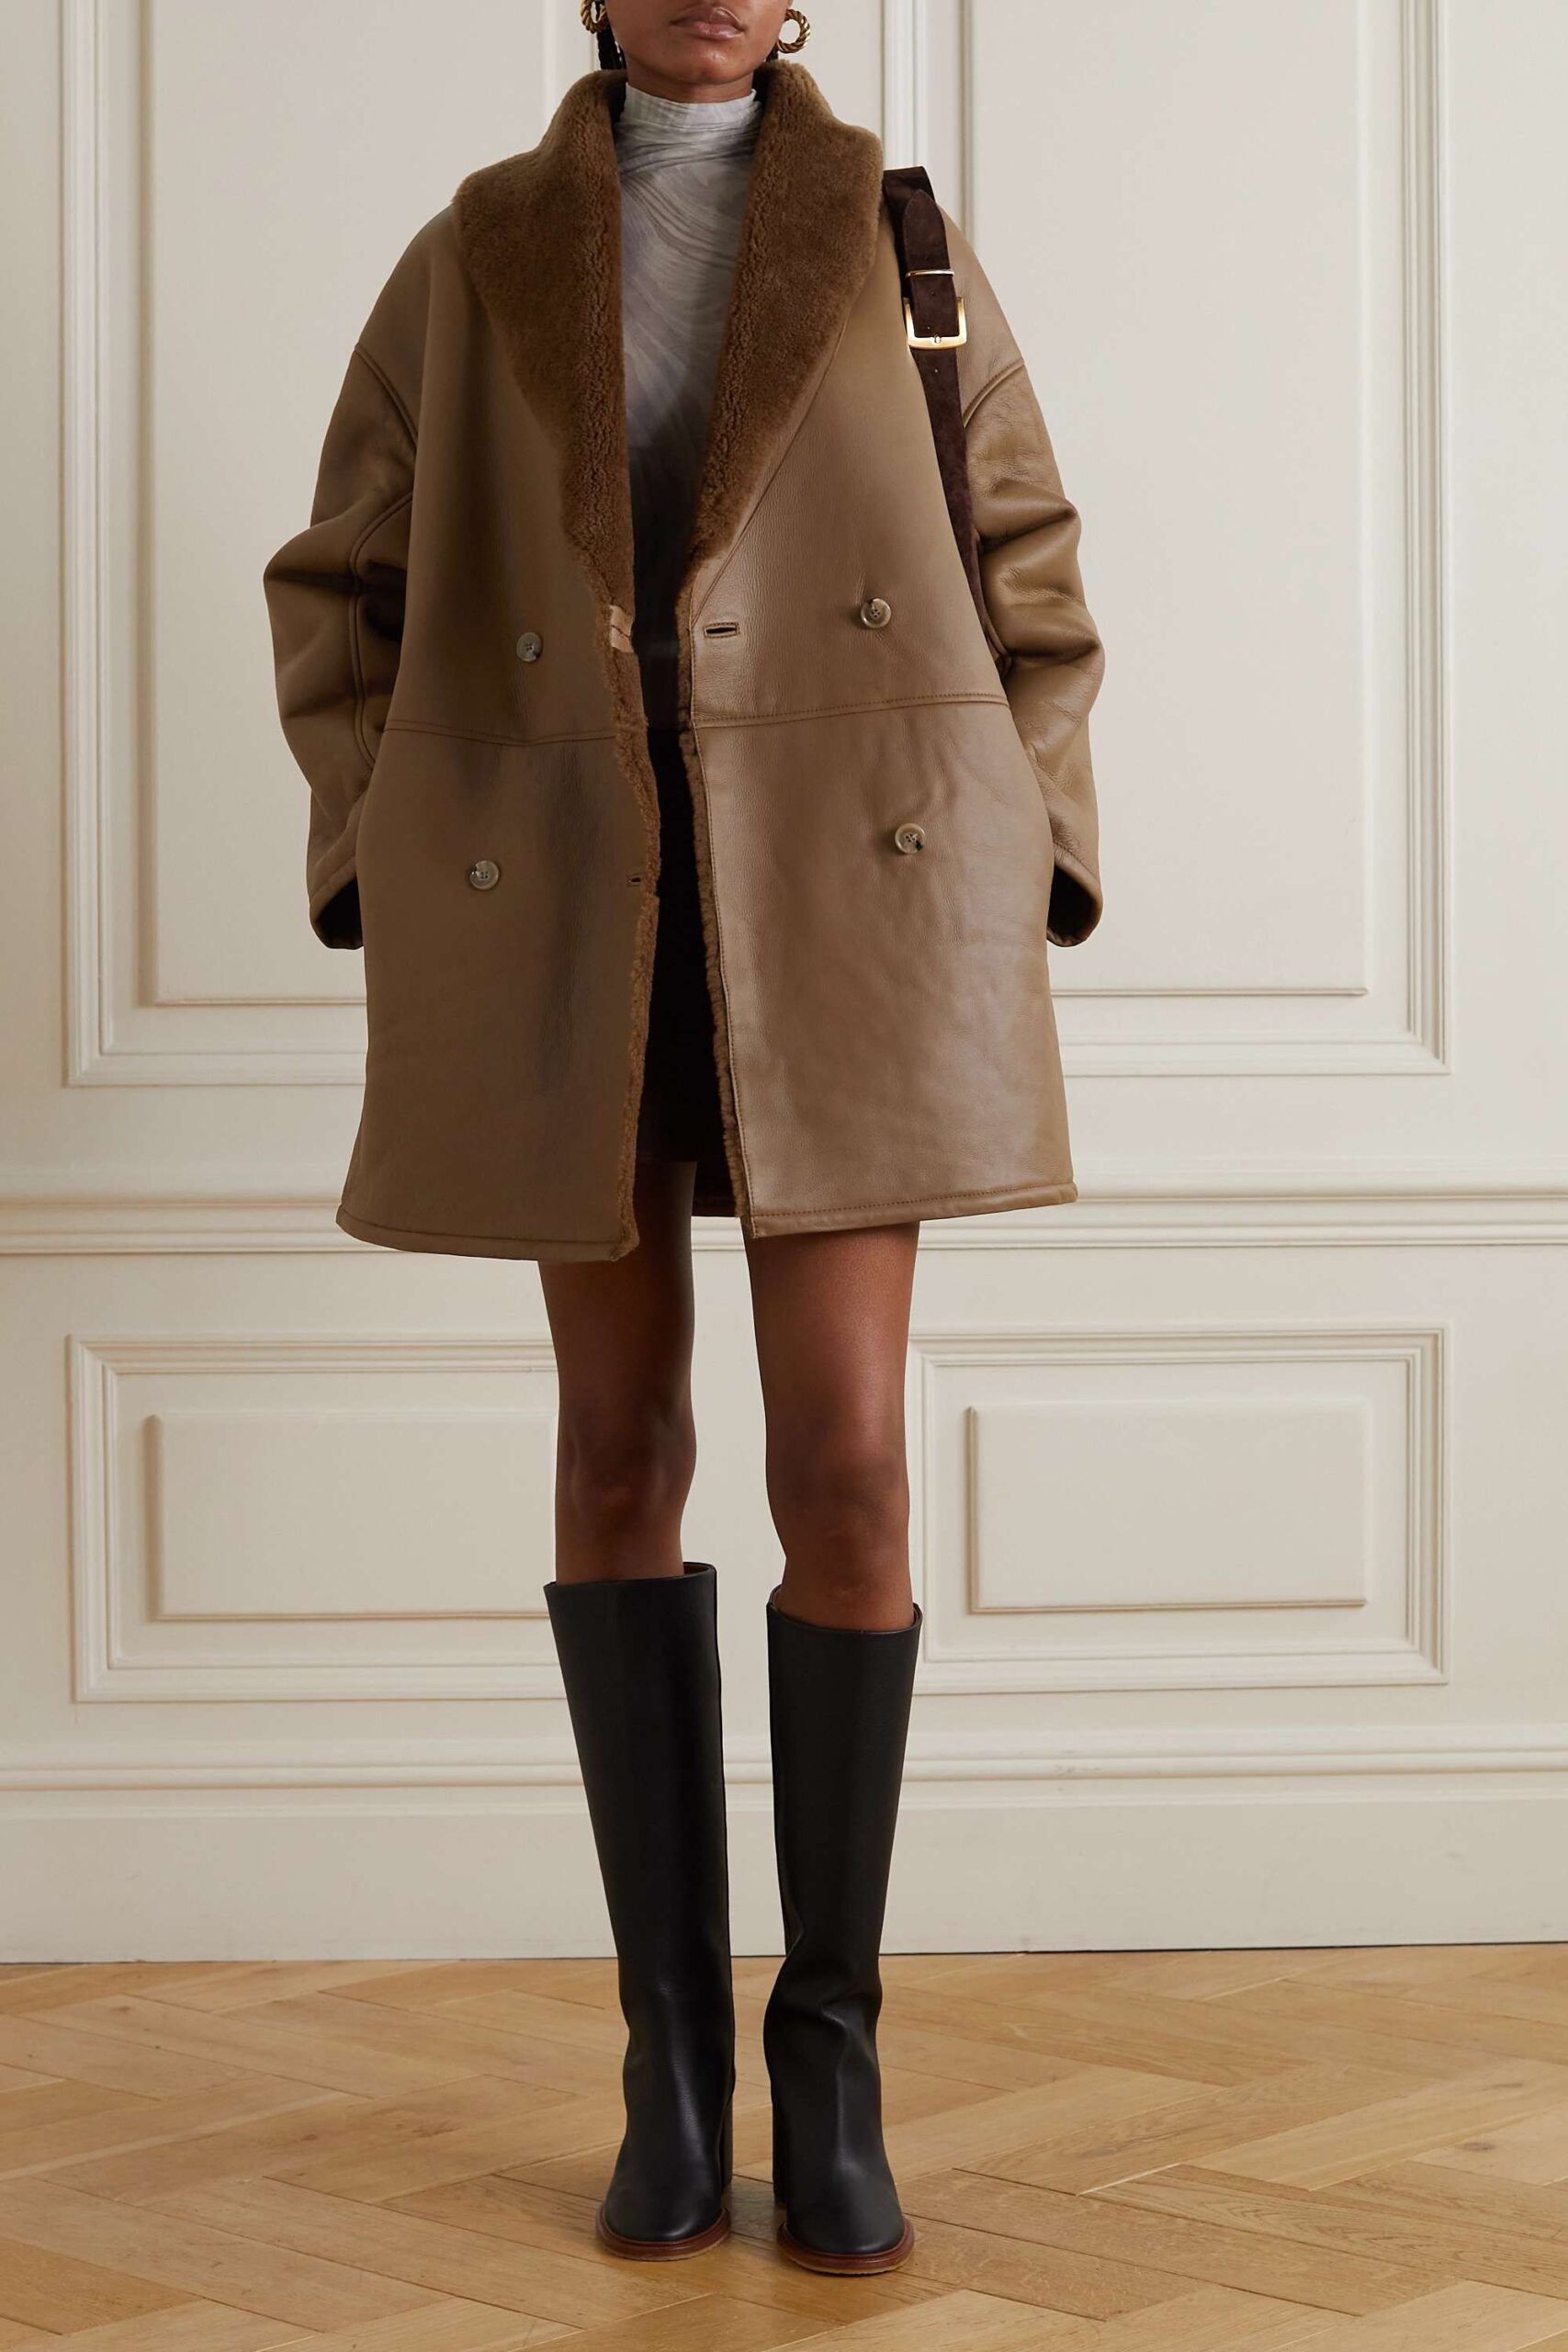 What to look for in a shearling coat